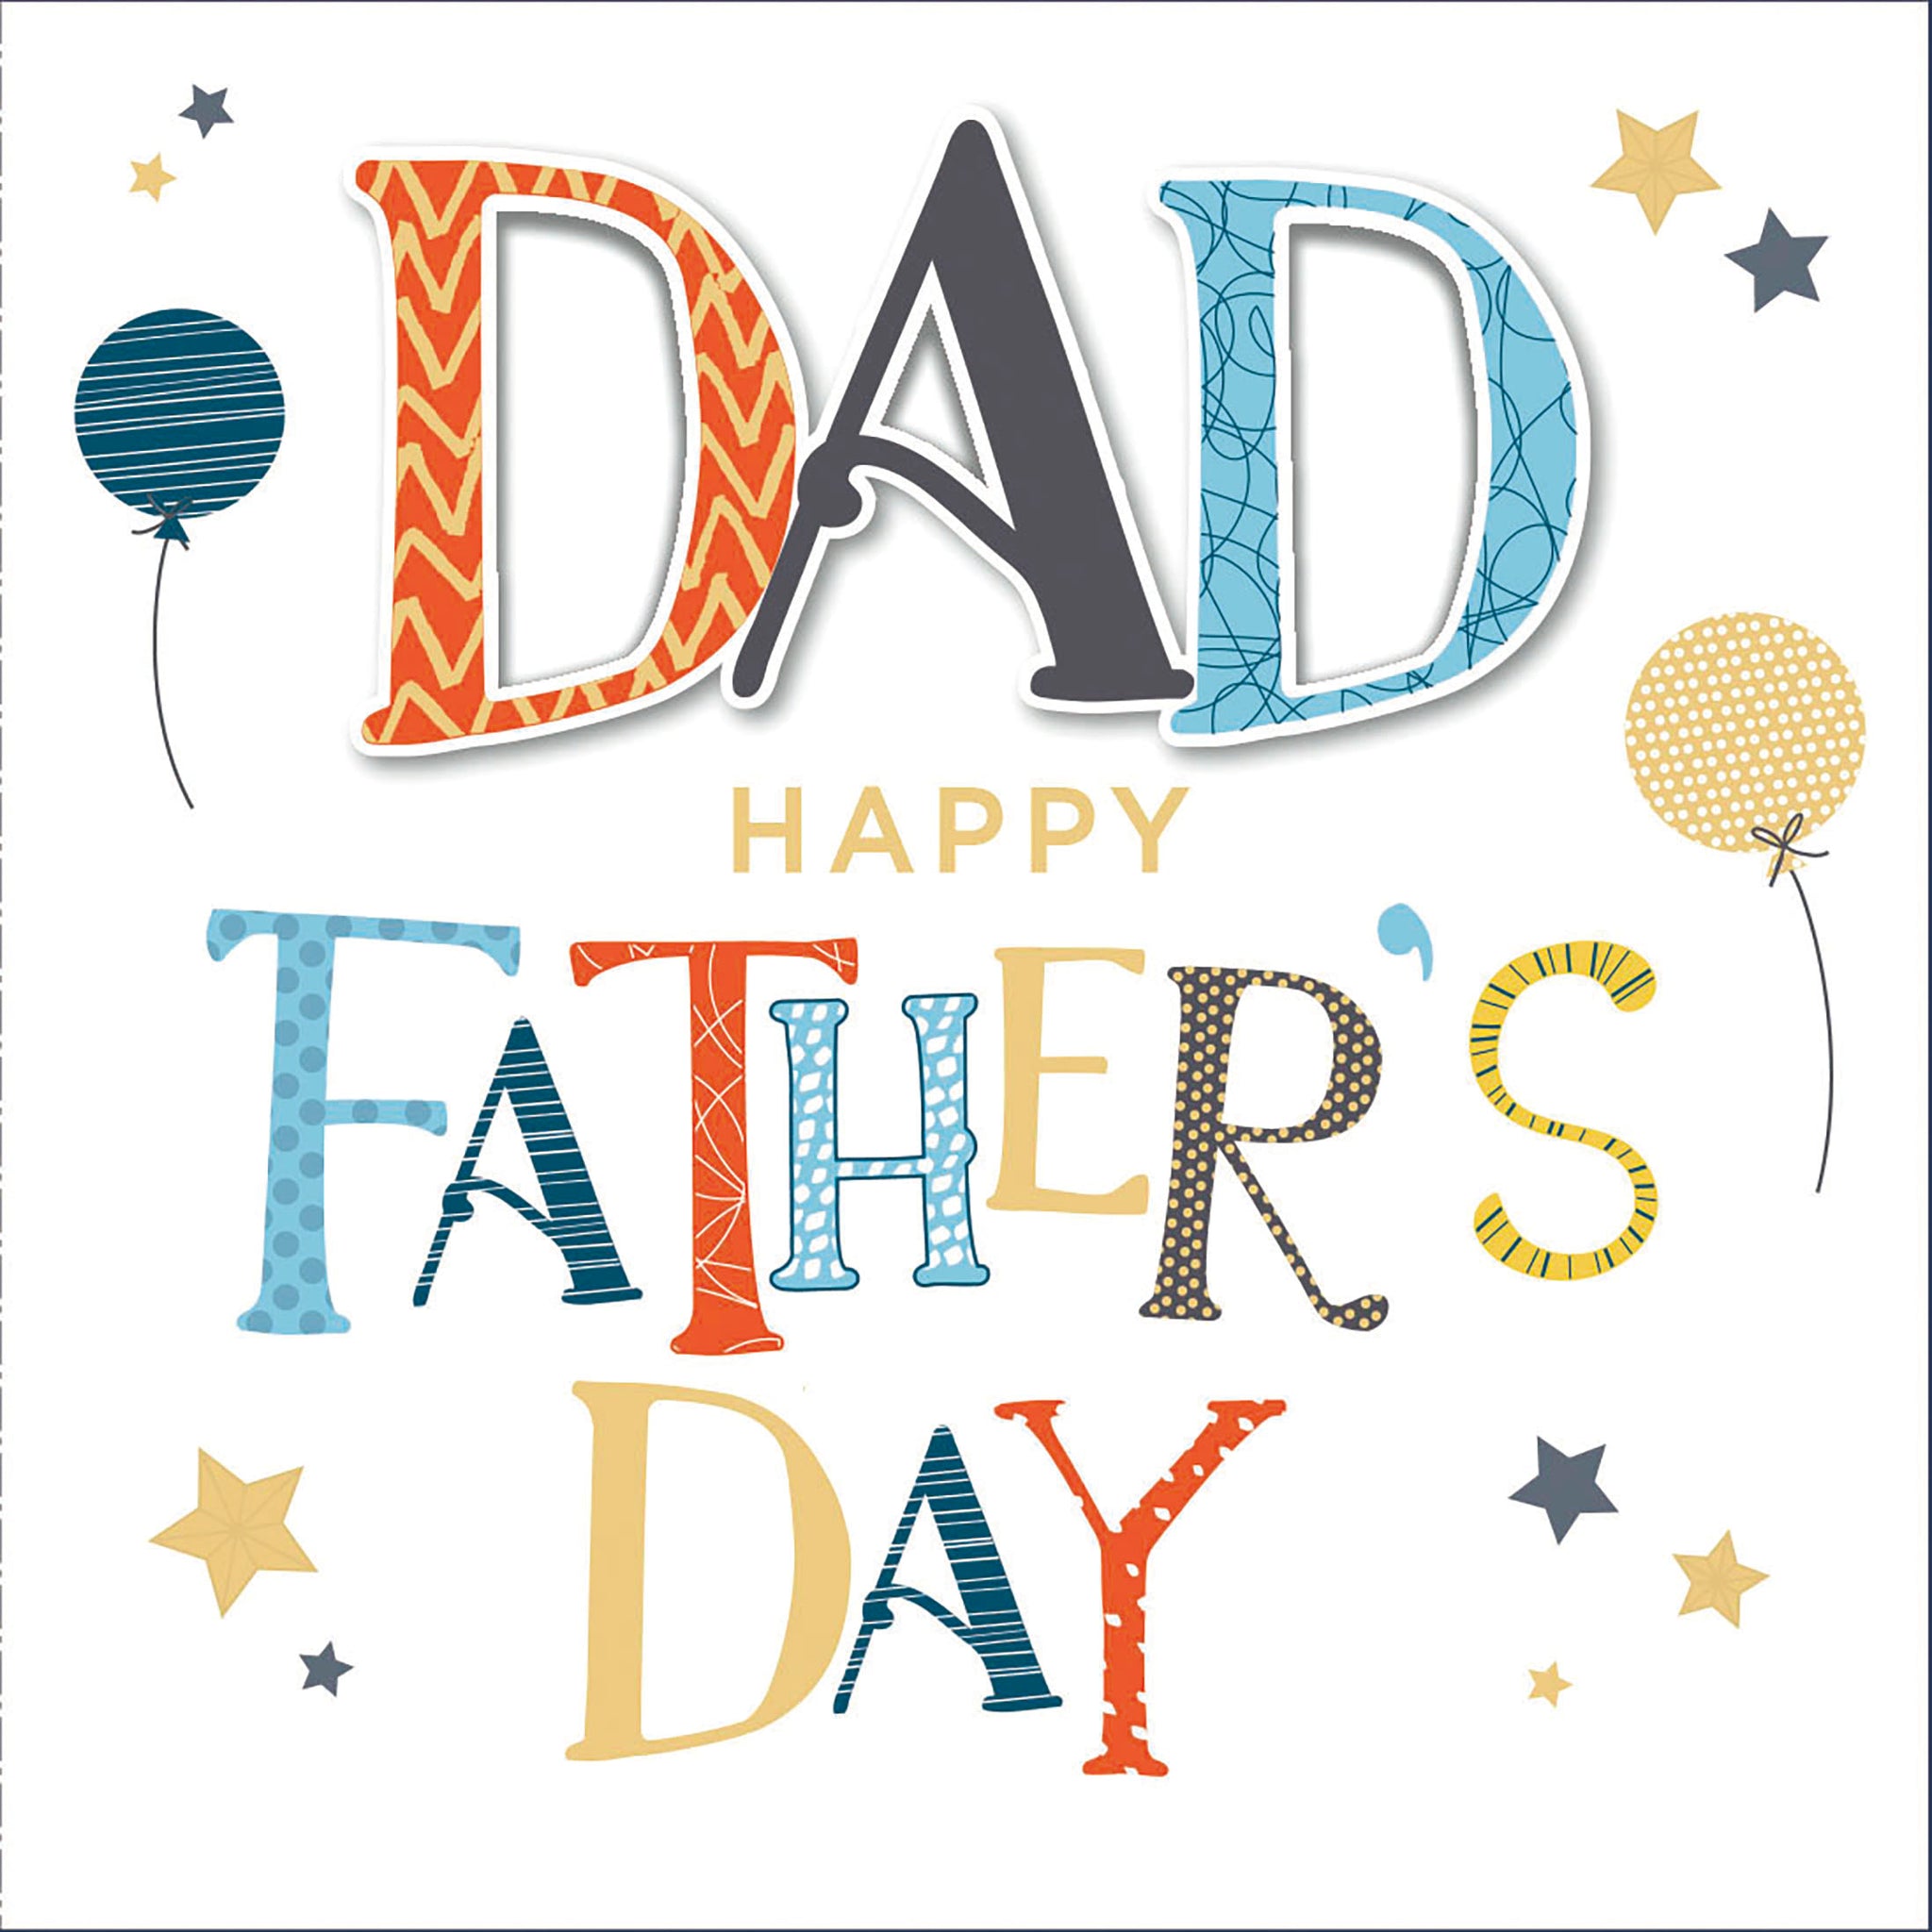 Dad Father’s Day card- modern stars and balloons